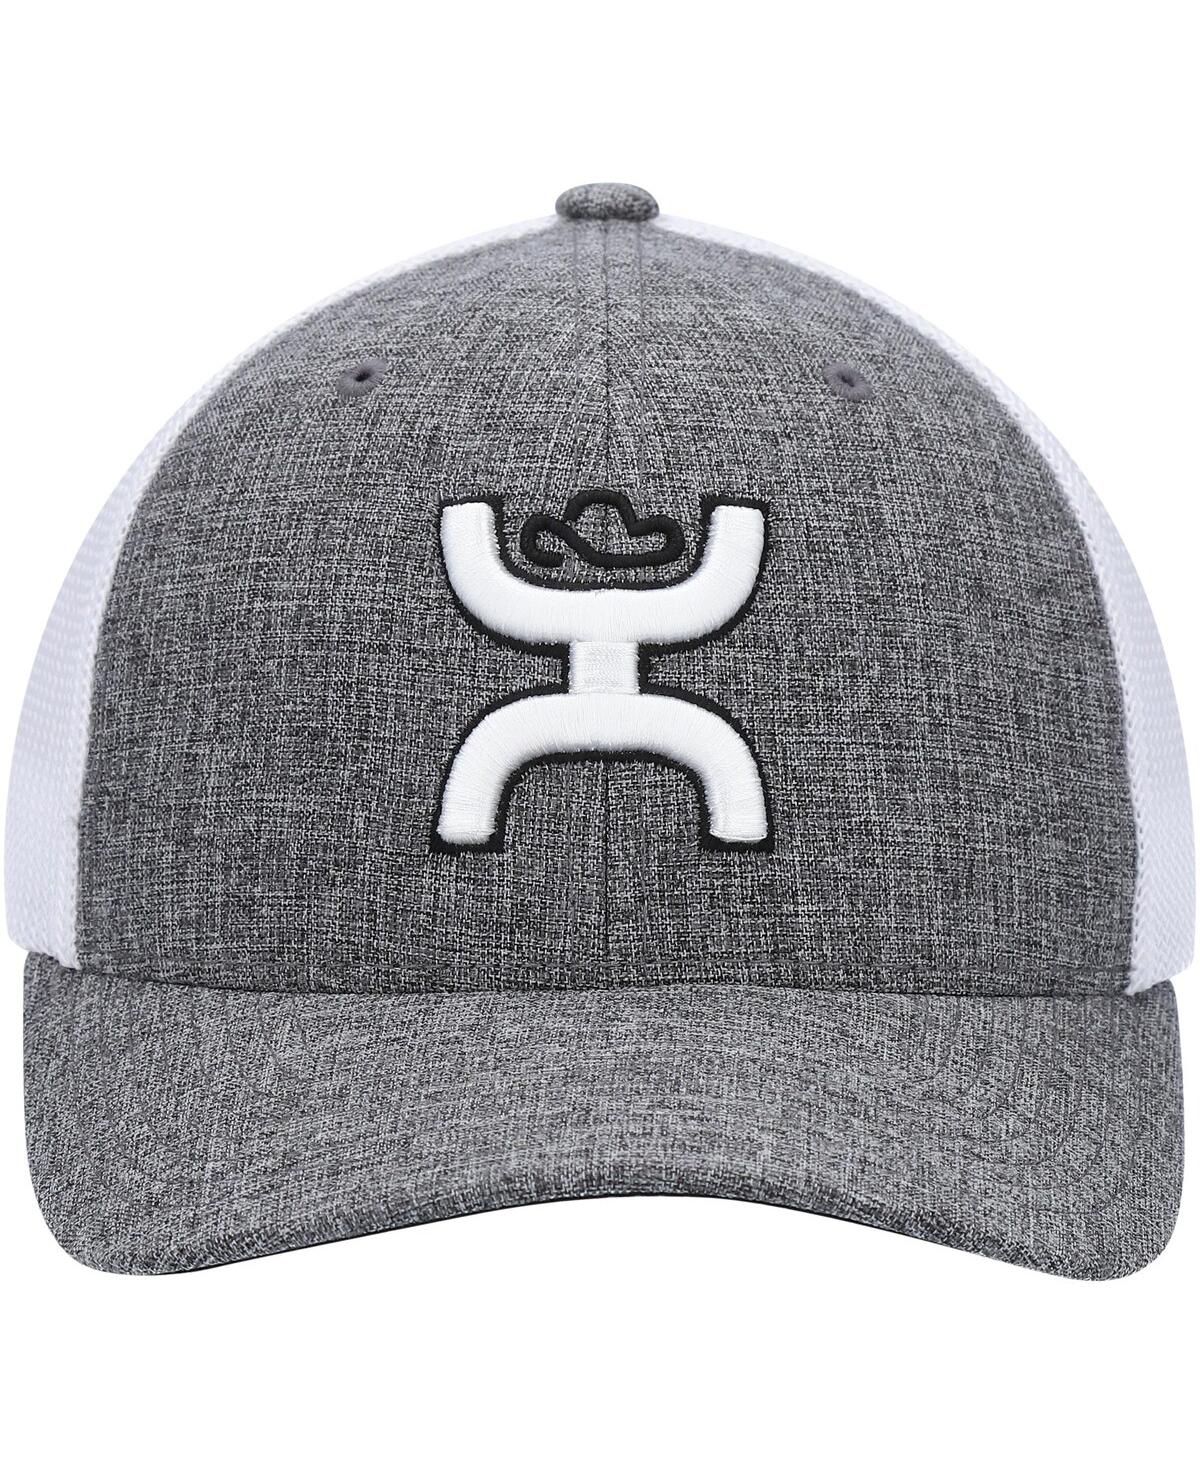 Shop Hooey Men's  Heather Charcoal, White Cayman Flex Hat In Heathered Charcoal,white